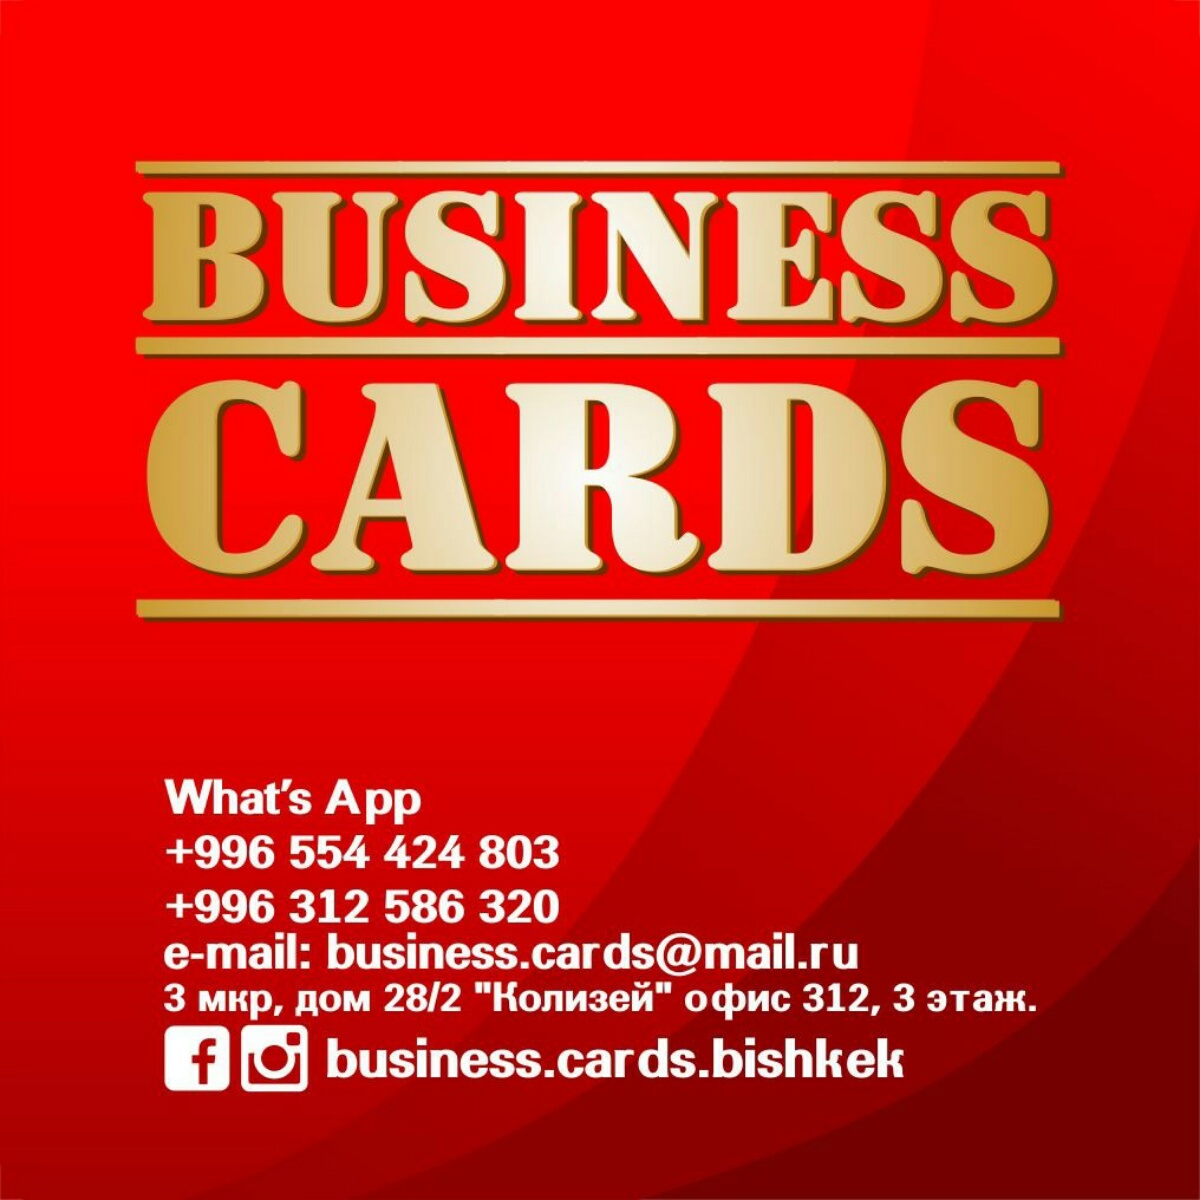 Business.cards